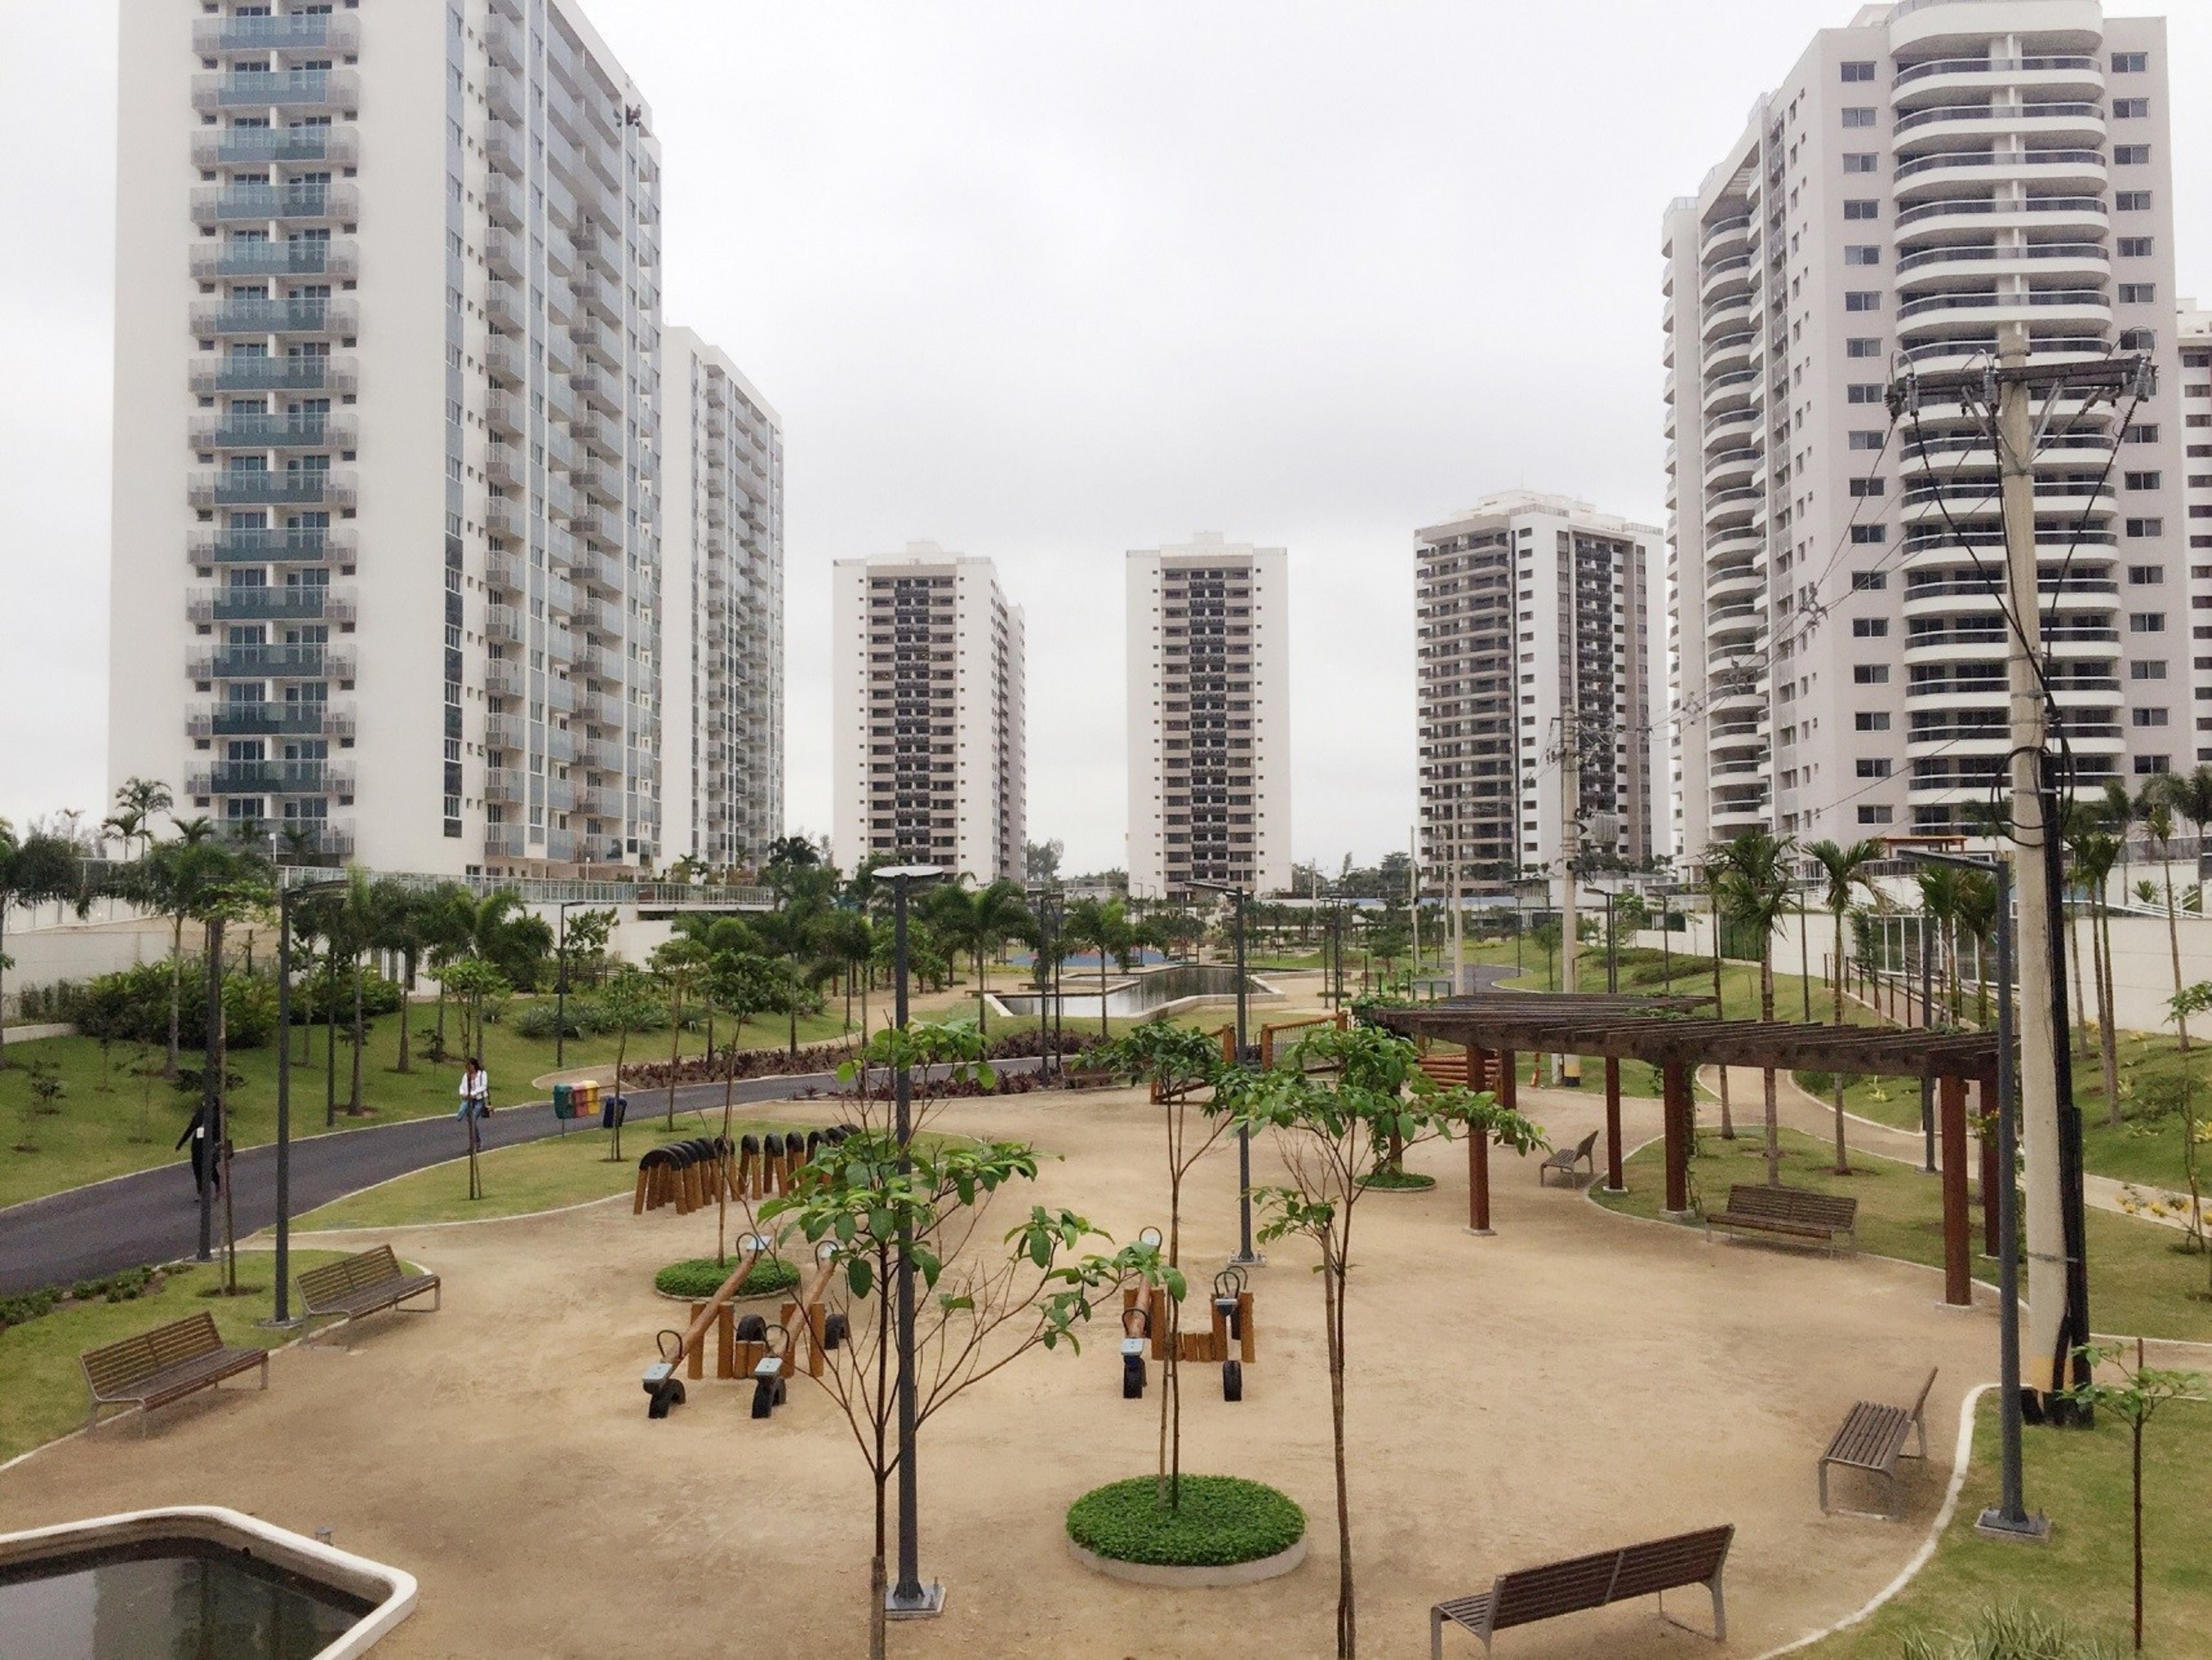 The Olympic Village for the Rio Games